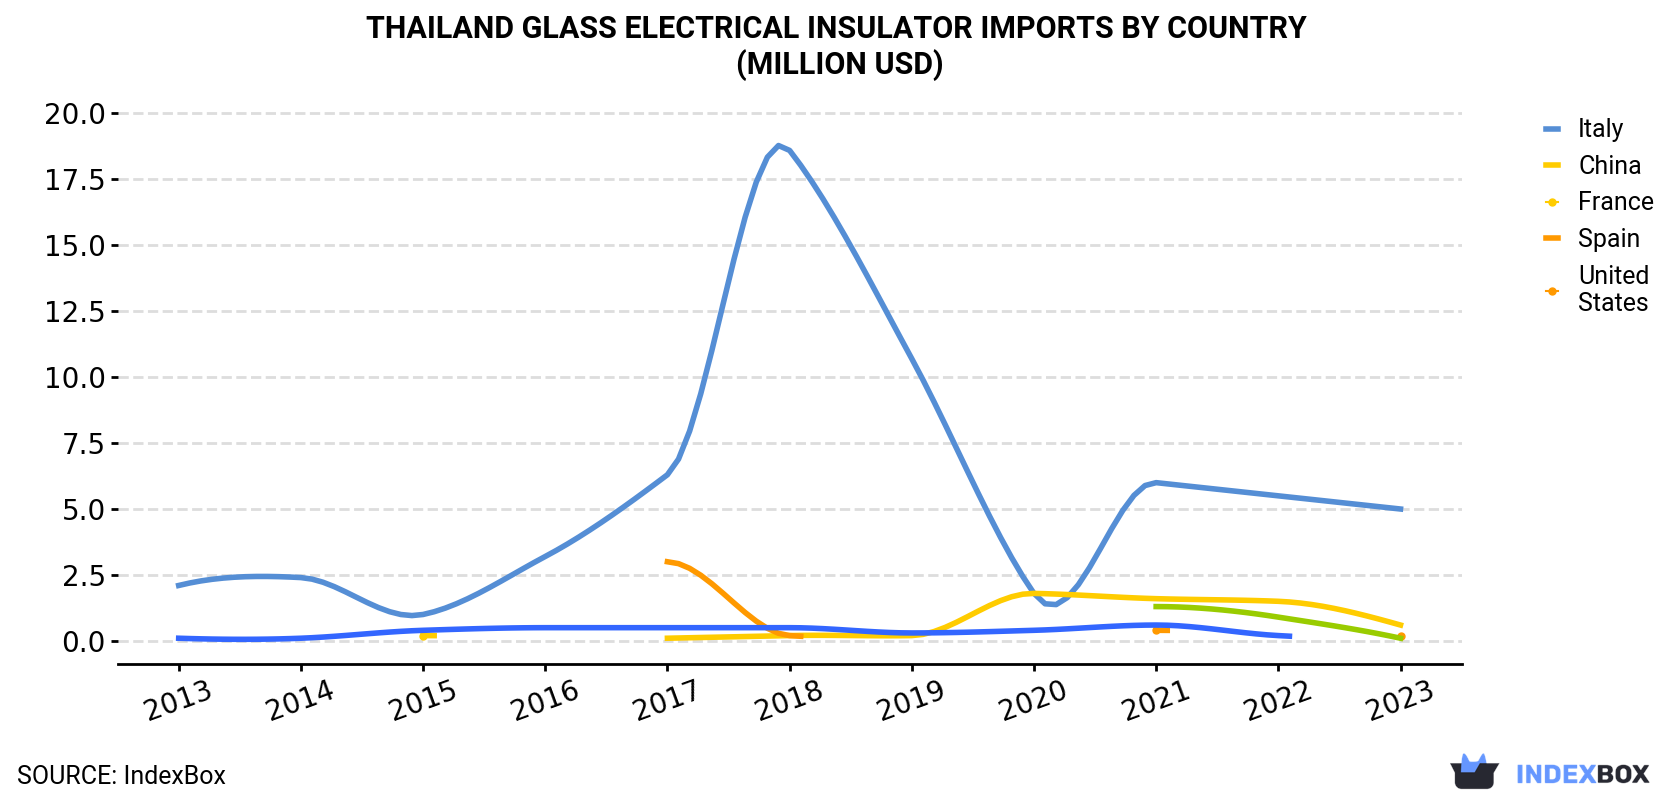 Thailand Glass Electrical Insulator Imports By Country (Million USD)